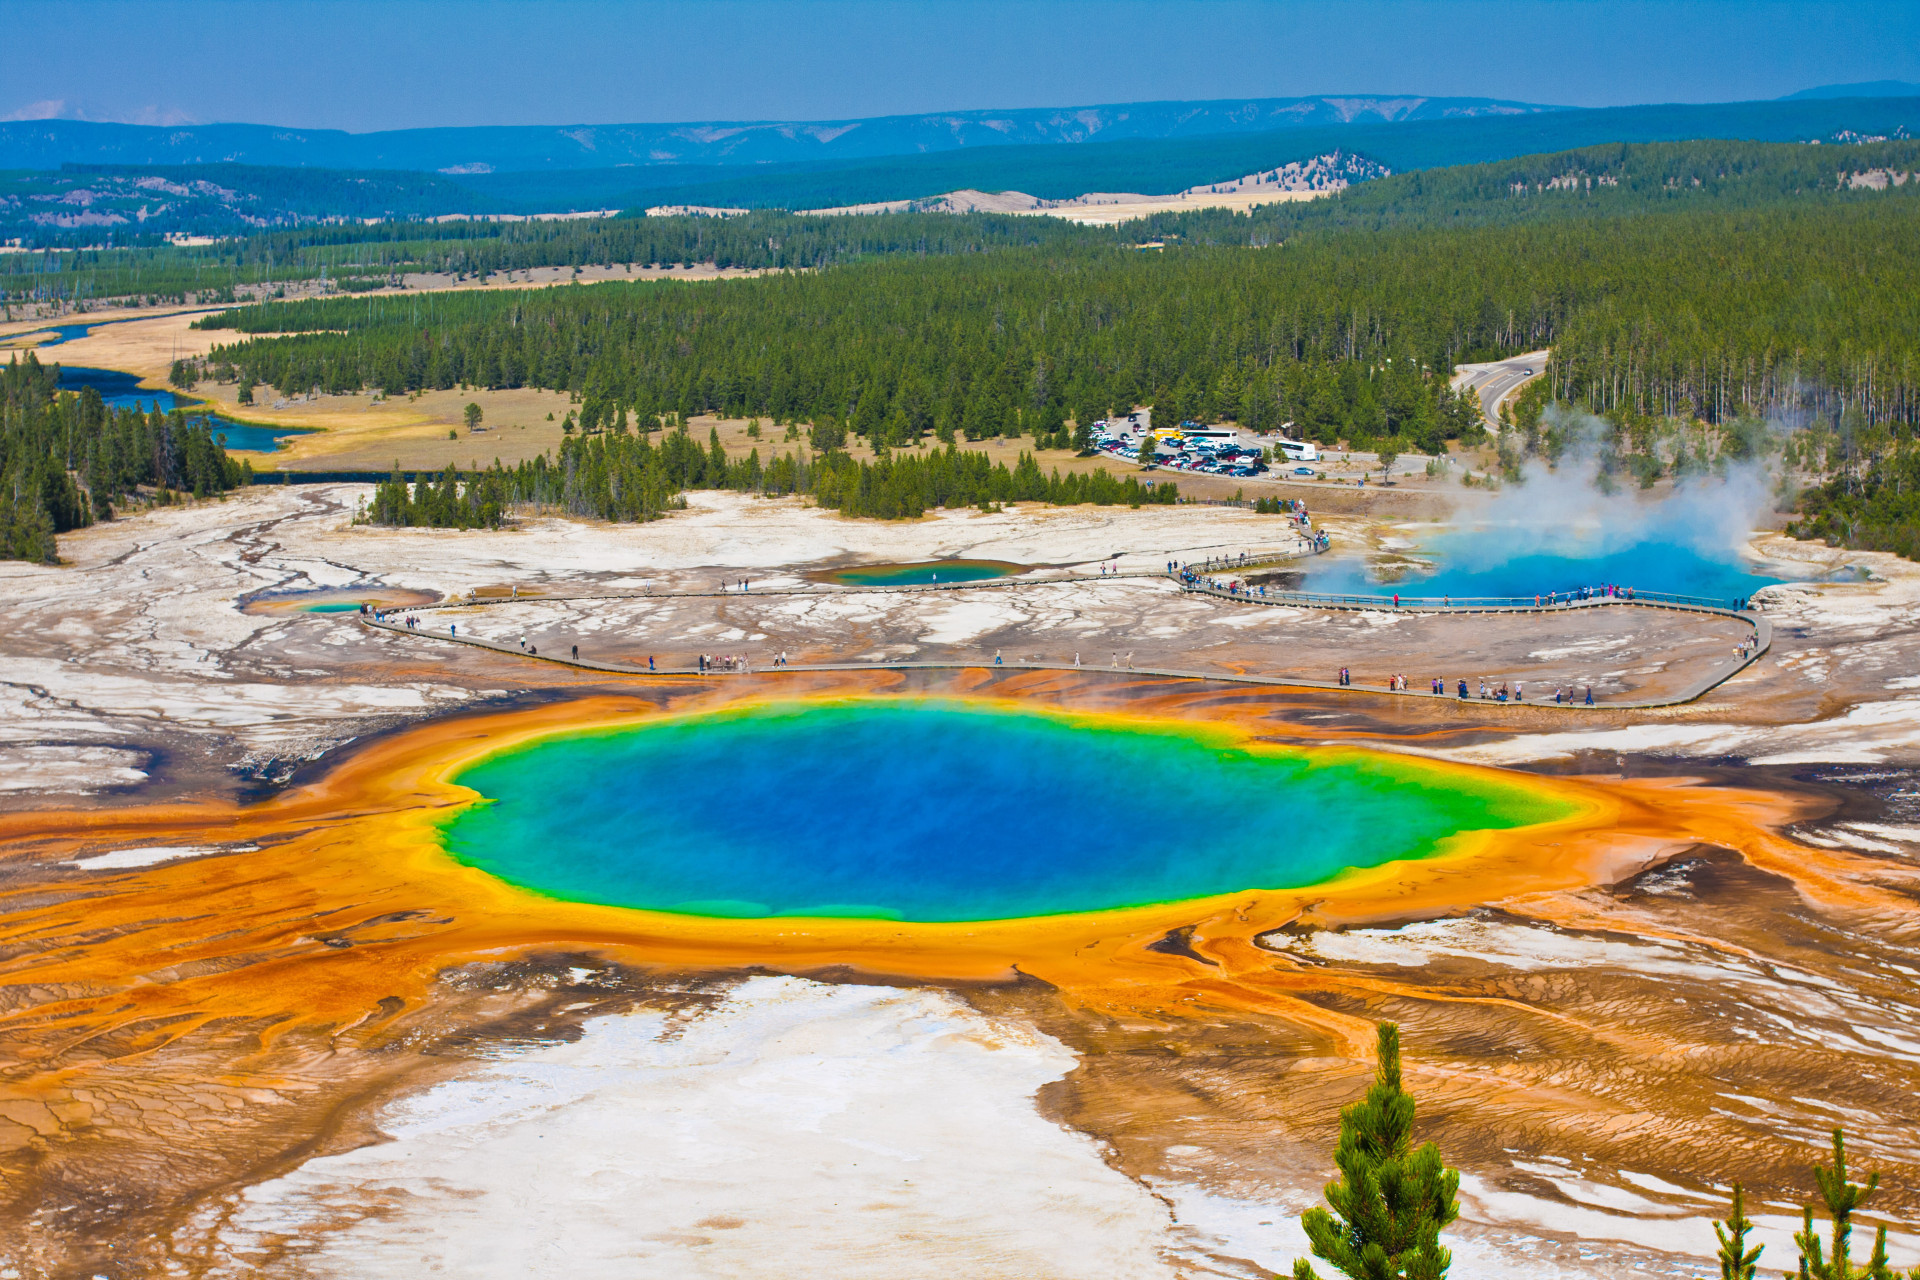 Yellowstone was established in 1872 and is the oldest national park in the US.